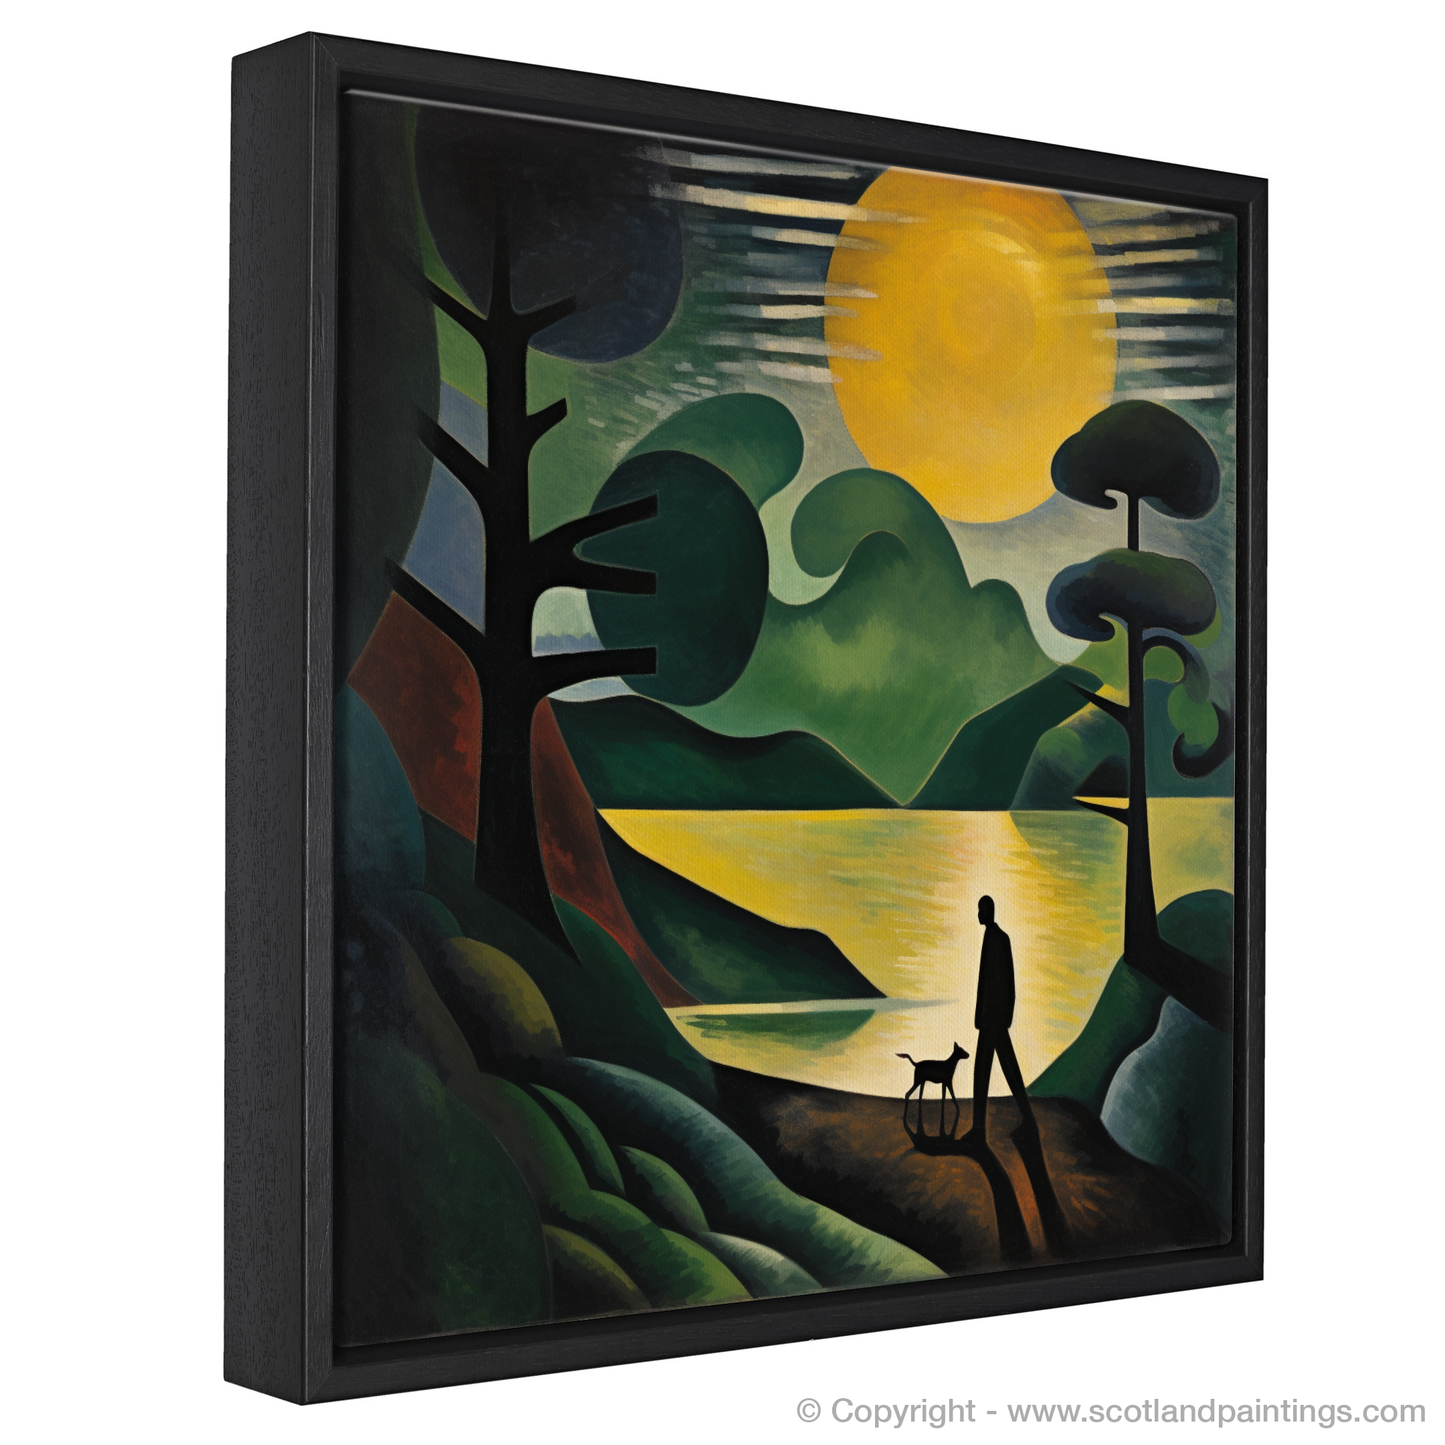 Painting and Art Print of A man walking dog at the side of Loch Lomond entitled "Solitude and Companionship by Loch Lomond".